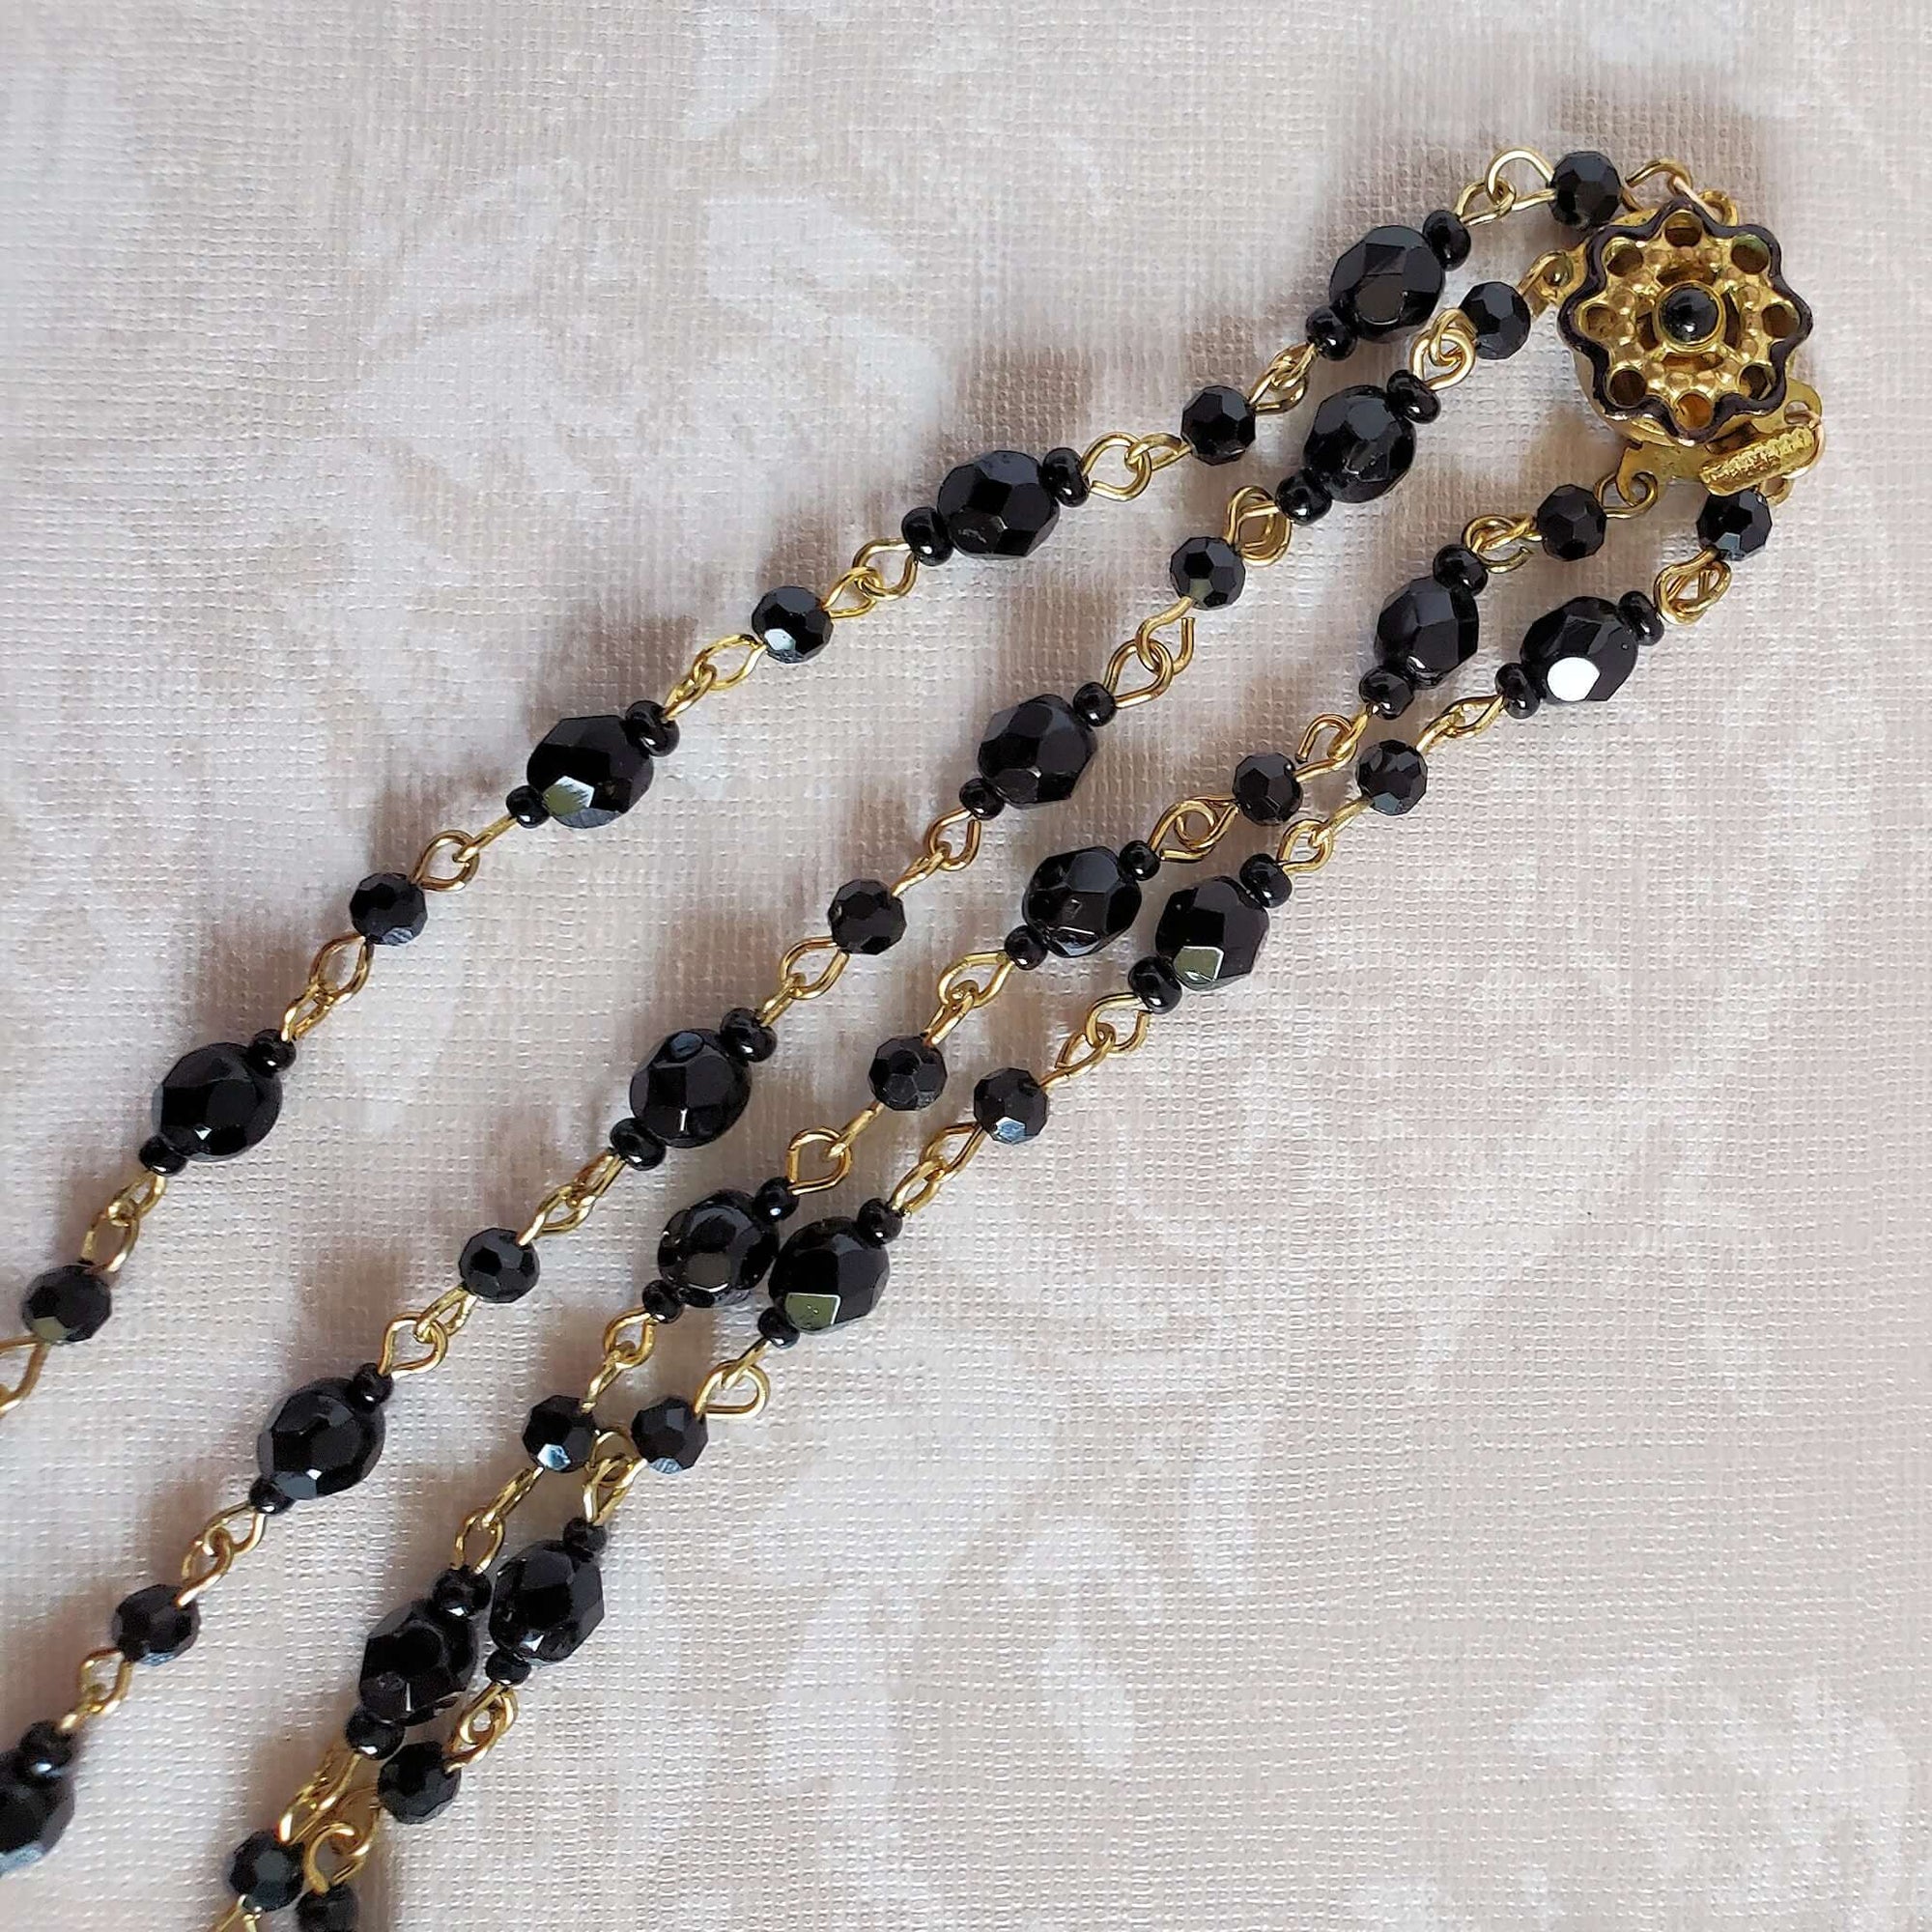 Coordinating black and Gold Floral Box Clasp Closure